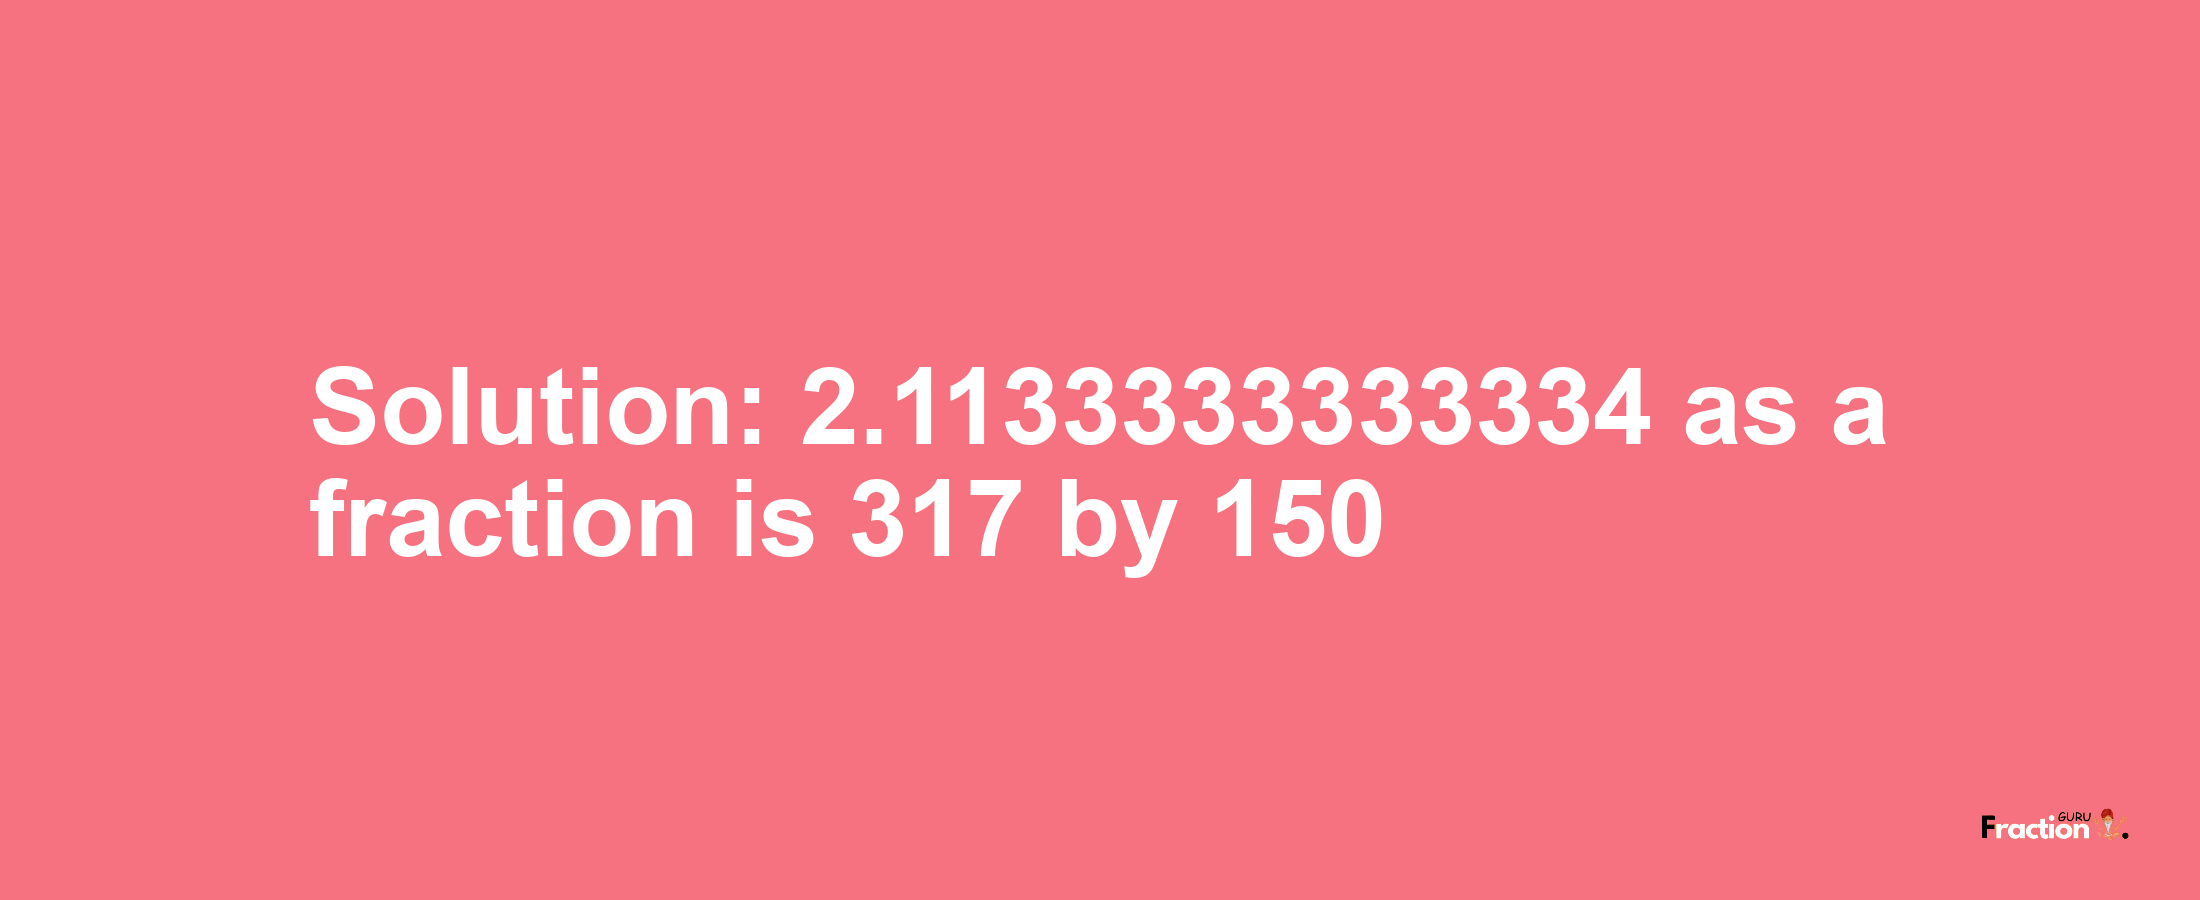 Solution:2.1133333333334 as a fraction is 317/150